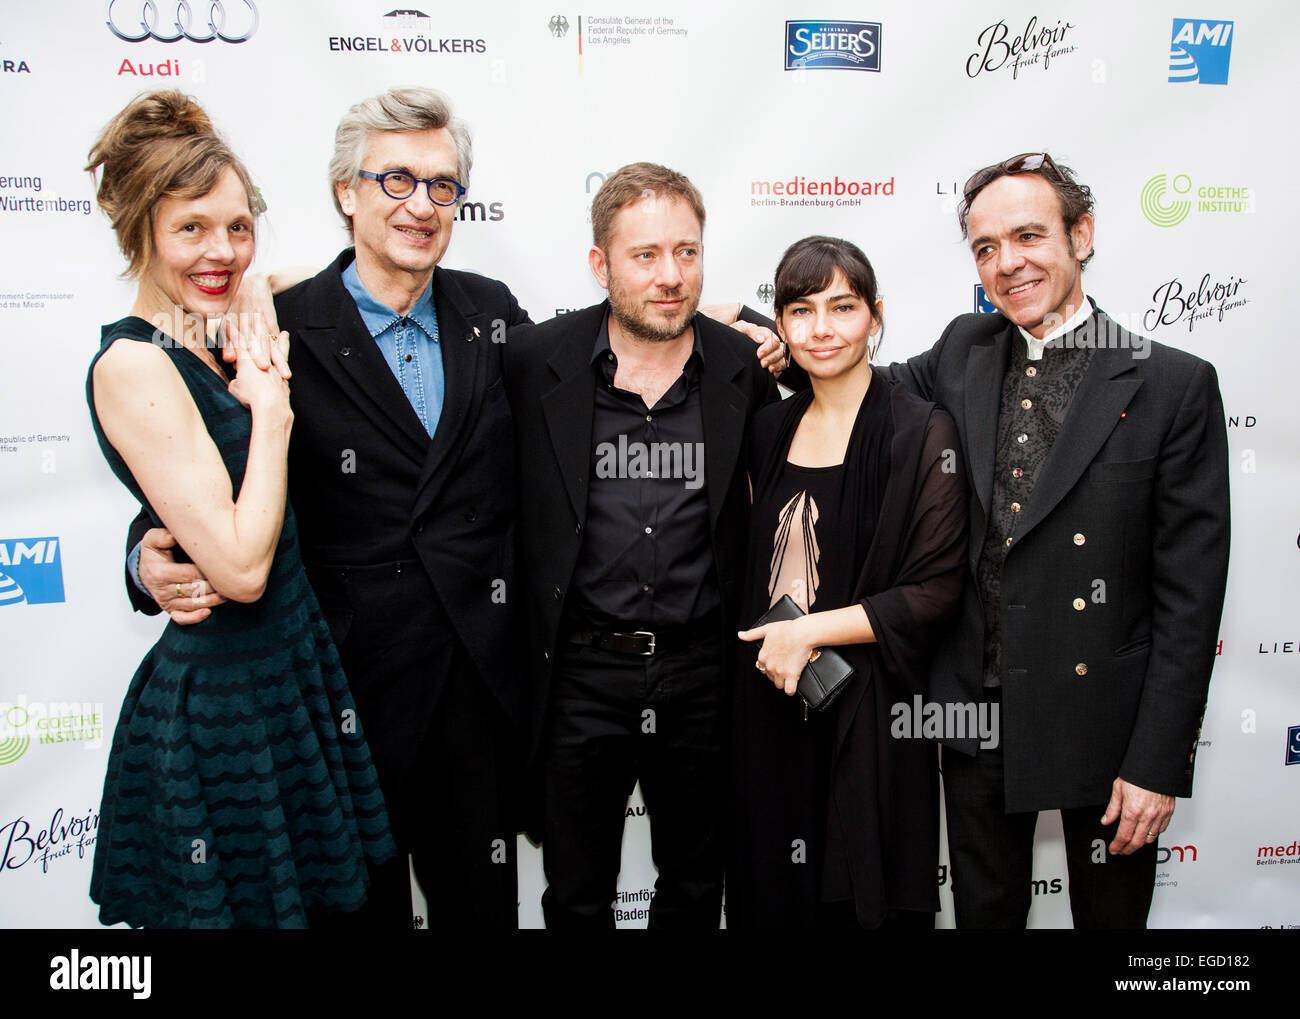 Juliano Ribeiro Salgado, Ivi Roberg, Laurent Petitgand, Wim Wenders, Donata Wenders and Juliano Salgado at the German Films and the Consulate General of the Federal Republic Of Germany's German Oscar nominees reception held at Villa Aurora in Pacific Palisades on February 21, 2015. Credit: Flaminia Fanale/Lumeimages.com Stock Photo